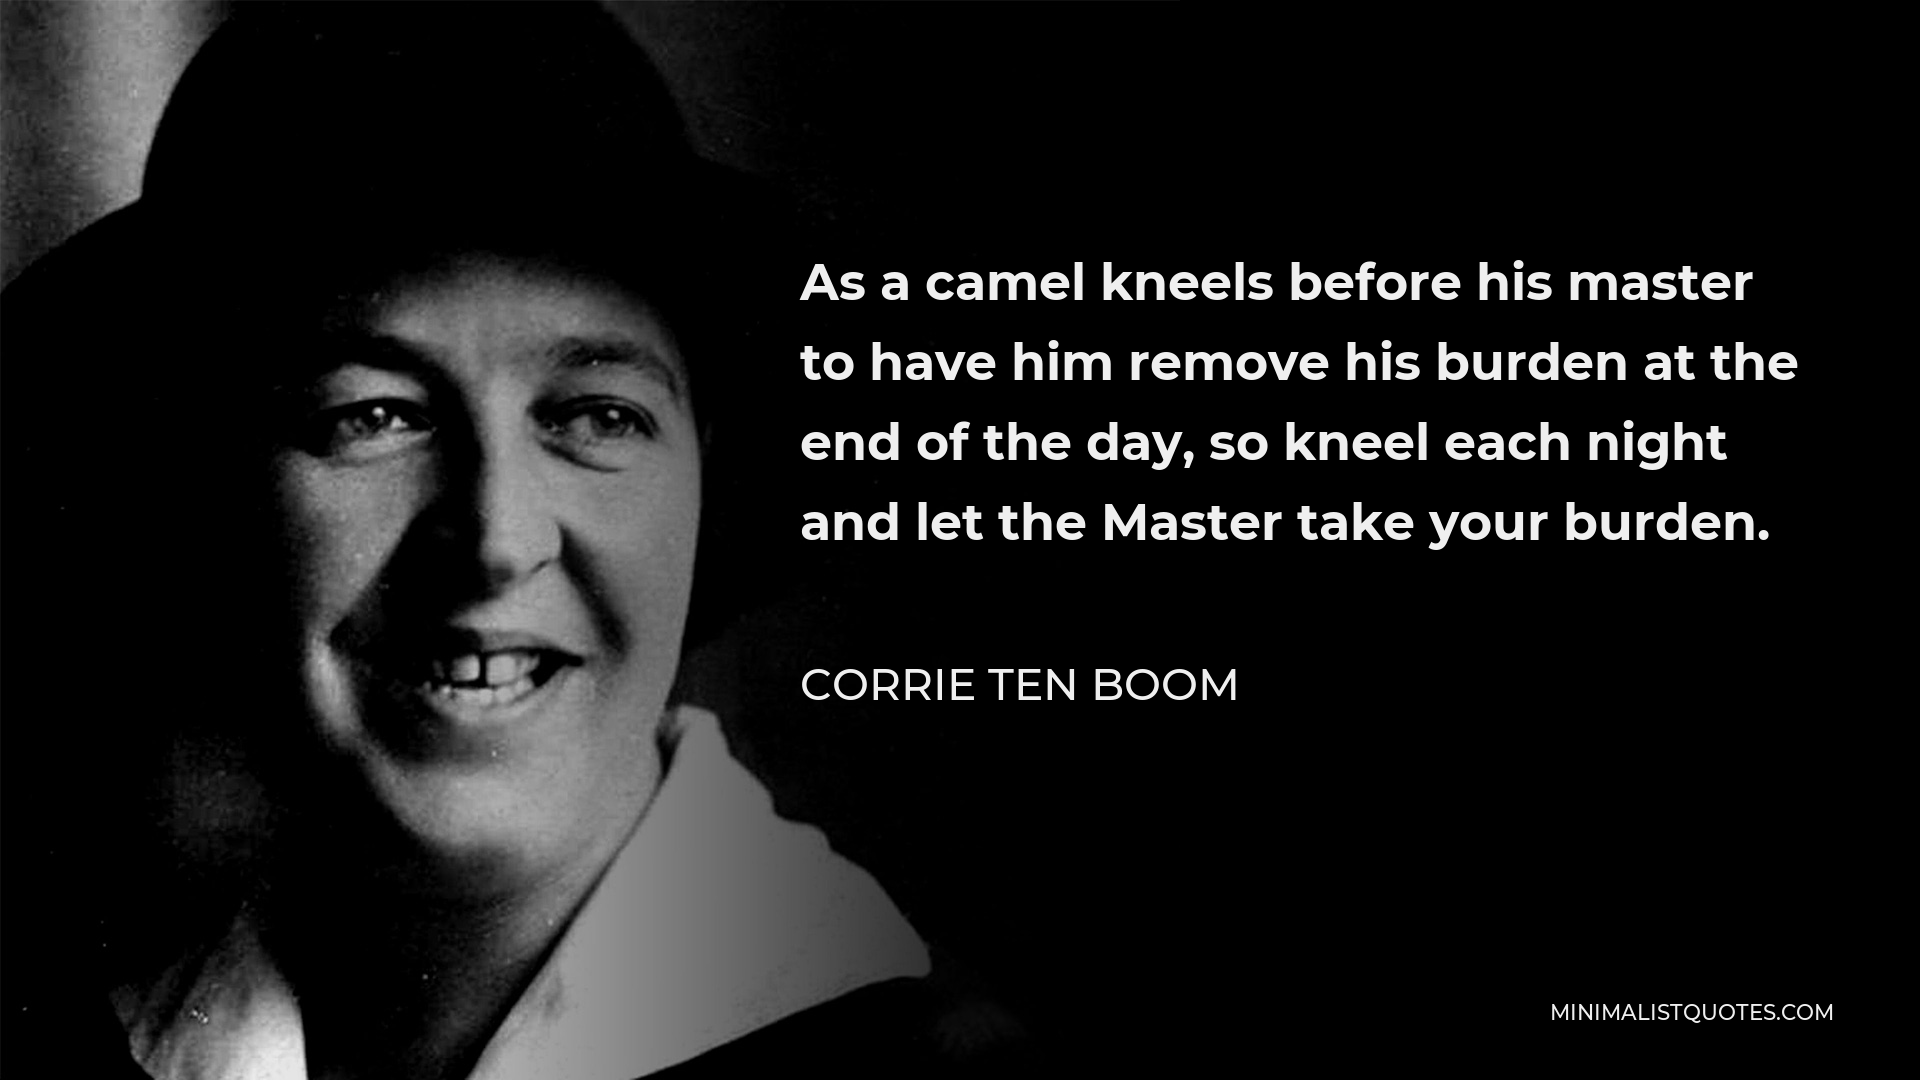 Corrie ten Boom Quote - As a camel kneels before his master to have him remove his burden at the end of the day, so kneel each night and let the Master take your burden.